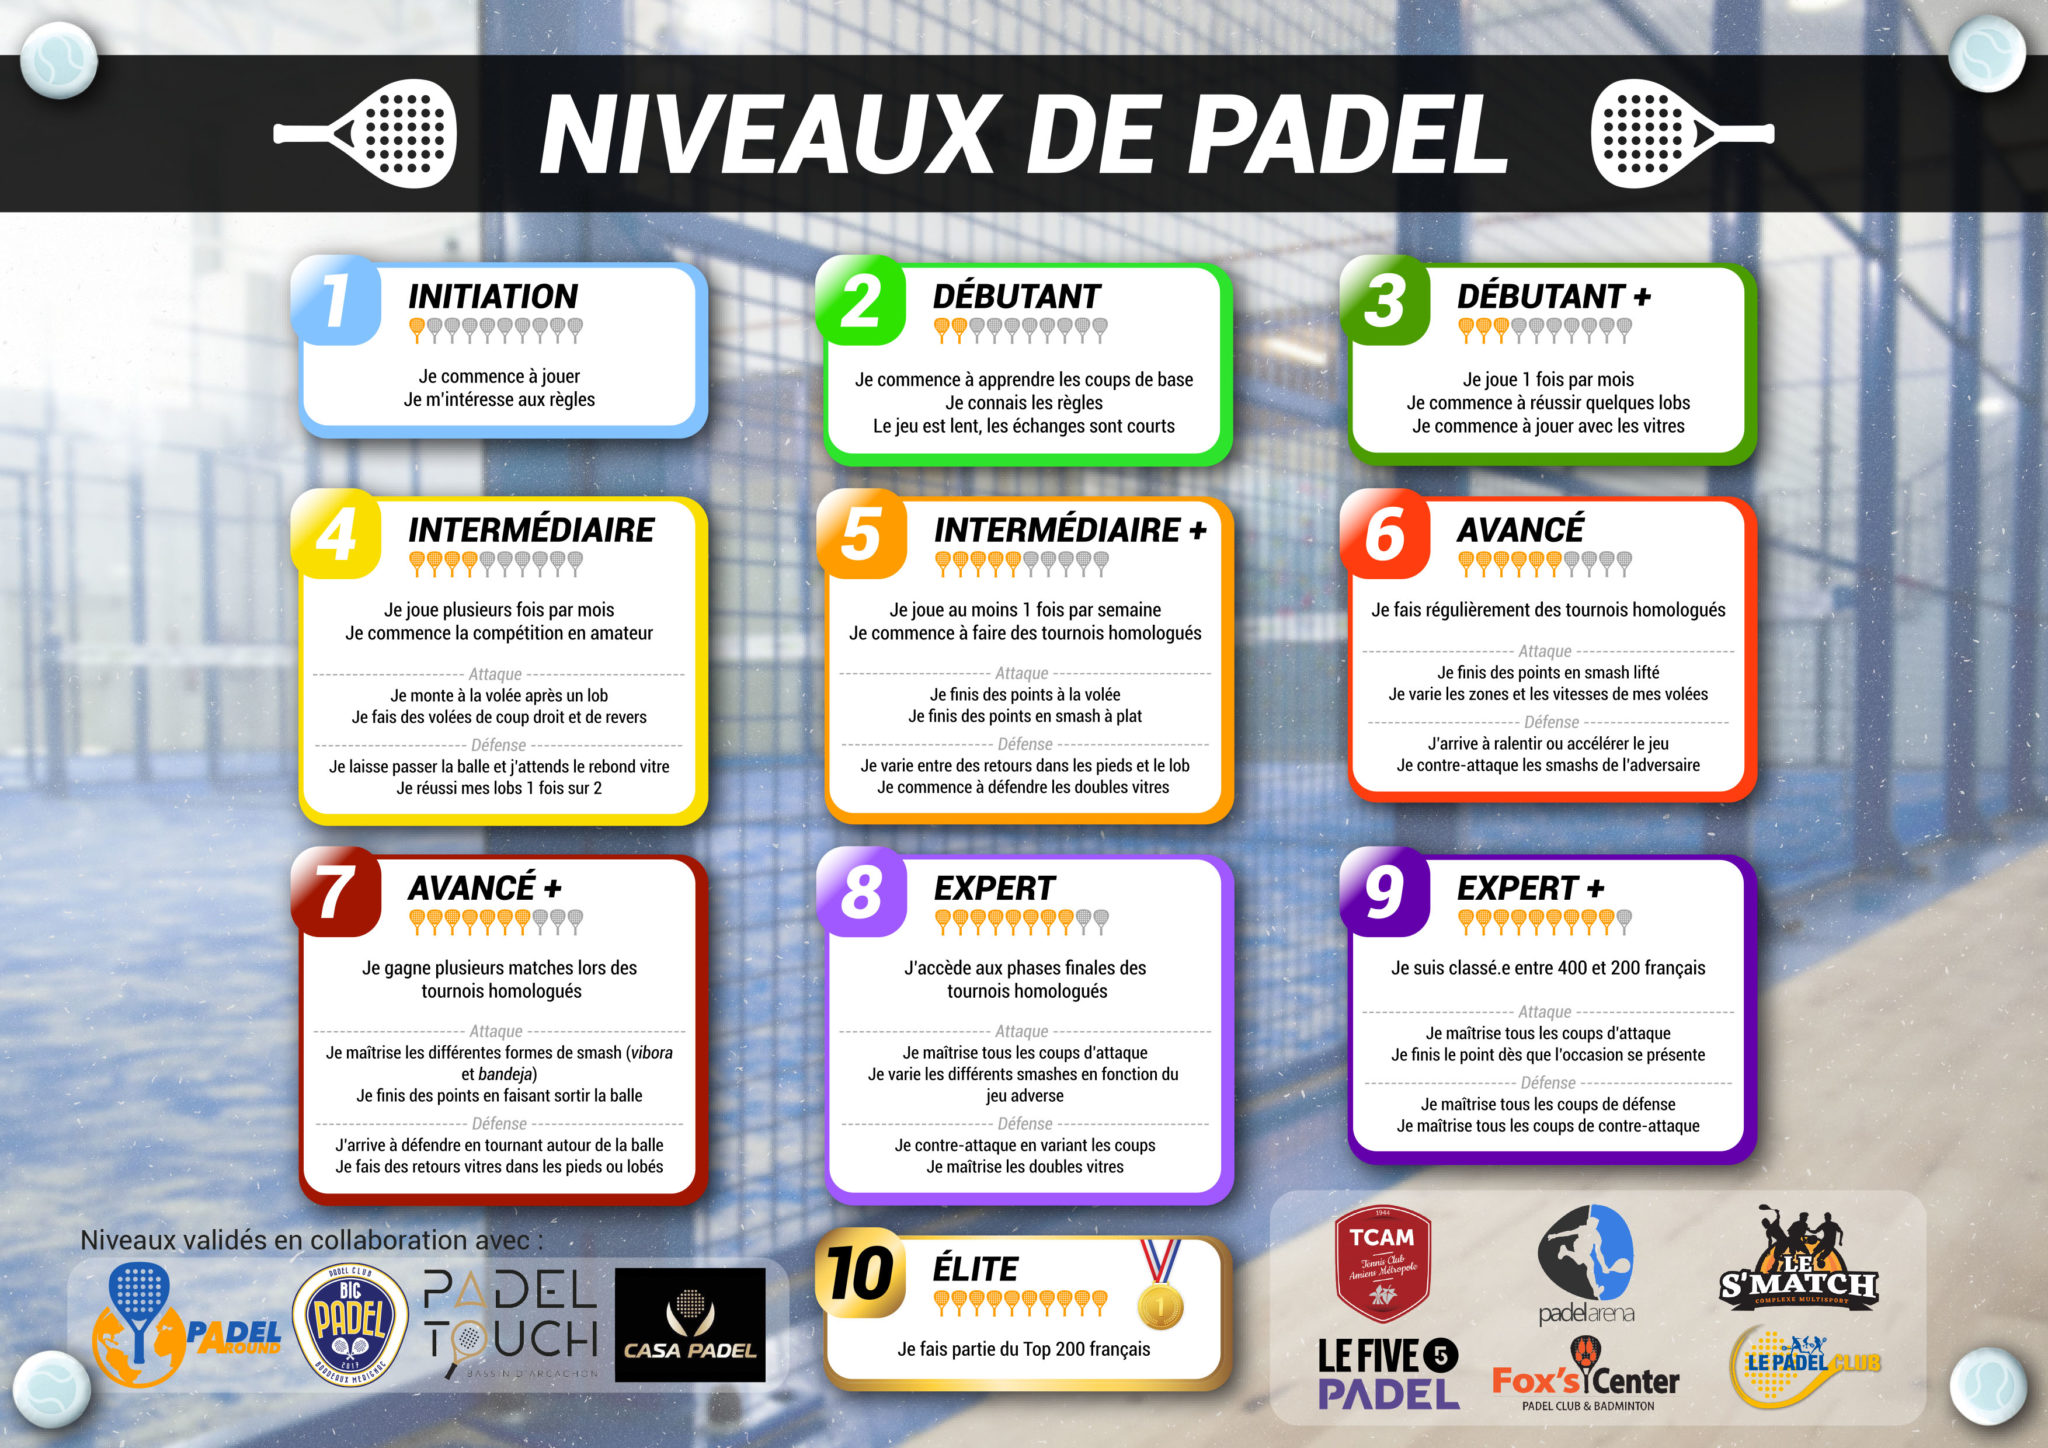 Padel Around launches a table of levels of padel